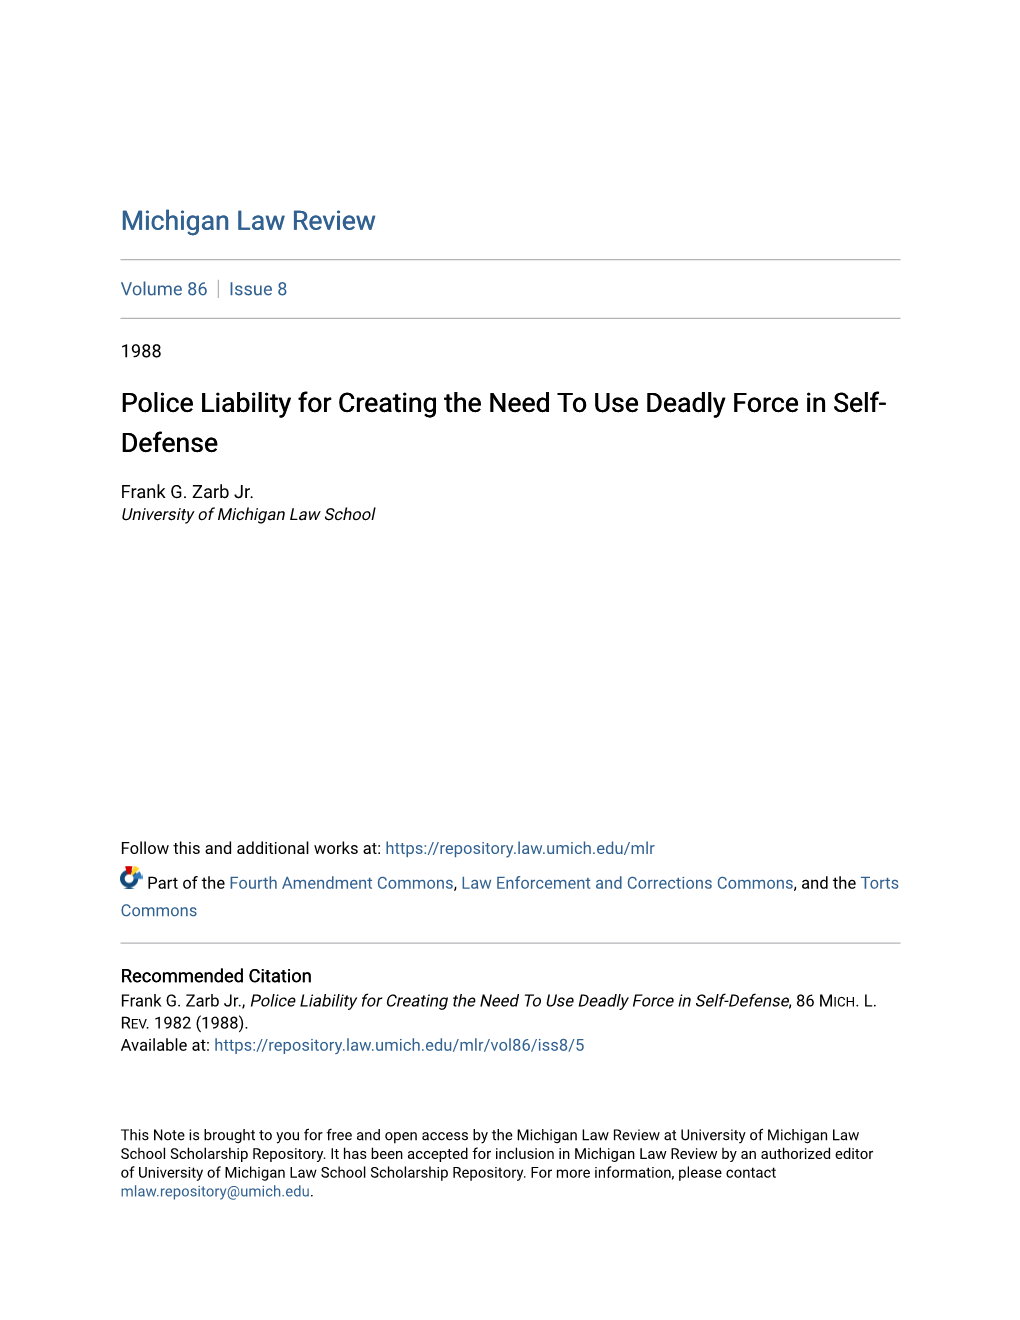 Police Liability for Creating the Need to Use Deadly Force in Self-Defense, 86 MICH